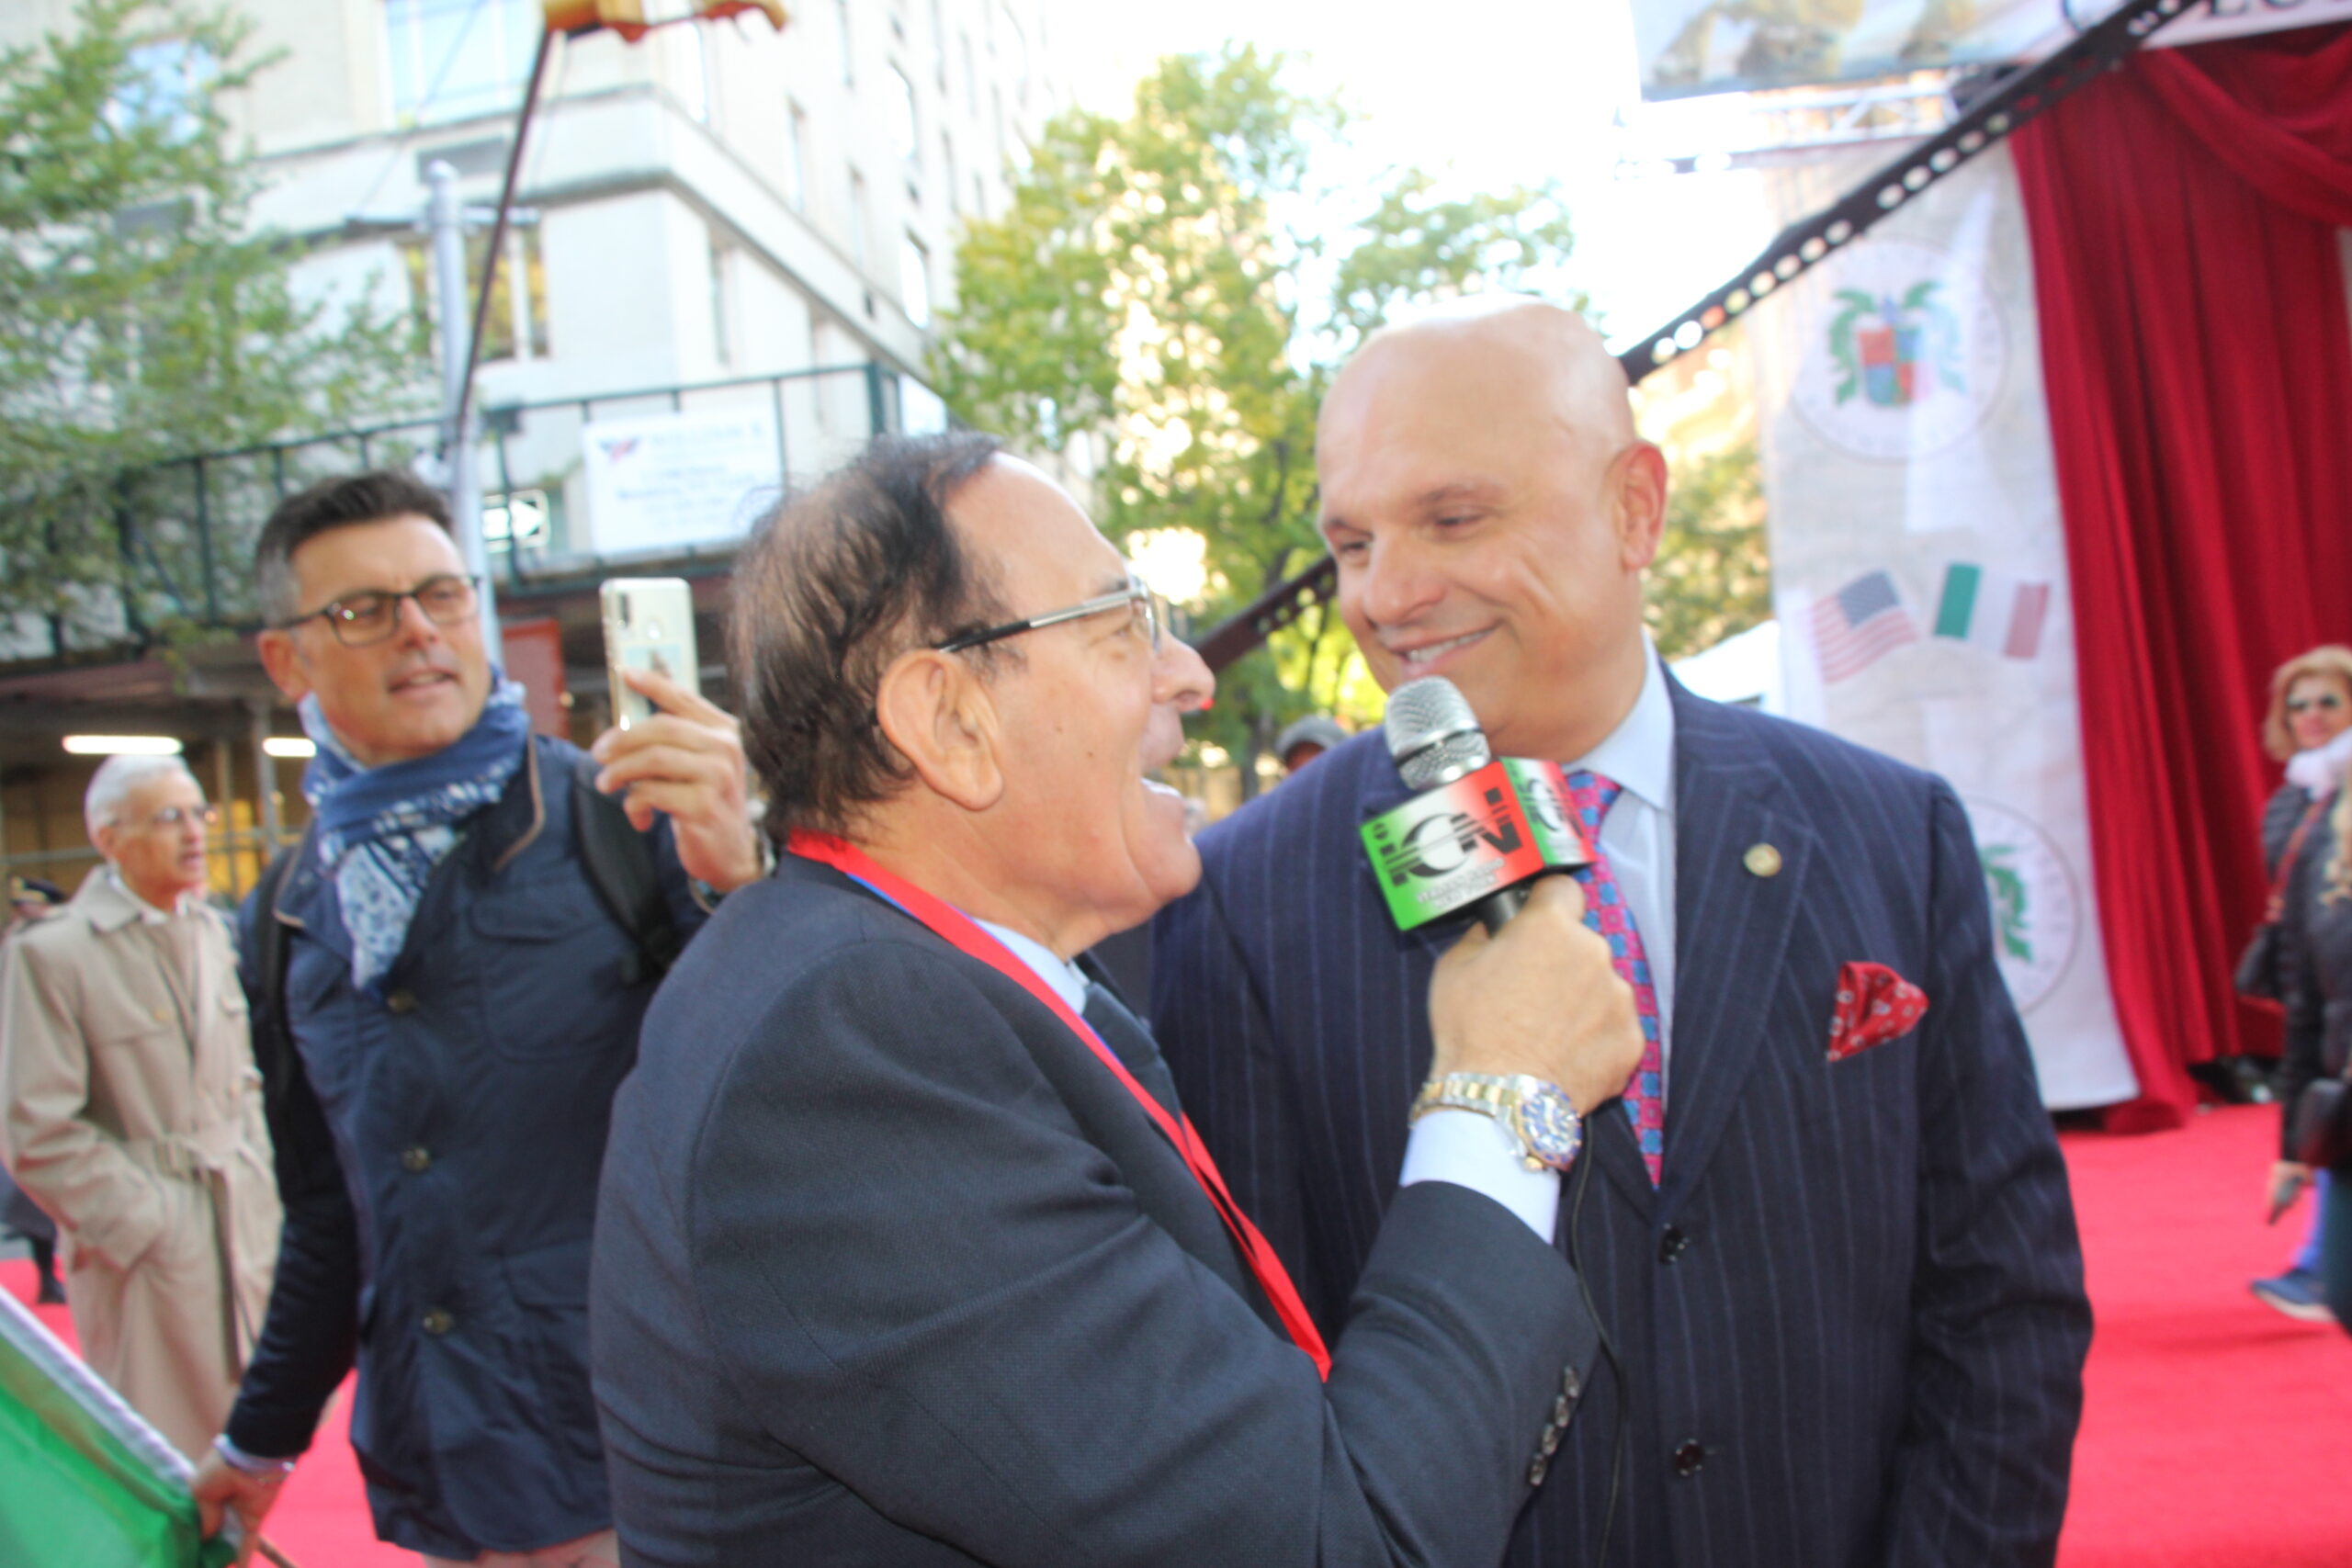 Arthur Aidala, engaged in an interview, brings the event into homes across New York as he discusses the importance of Italian-American heritage.